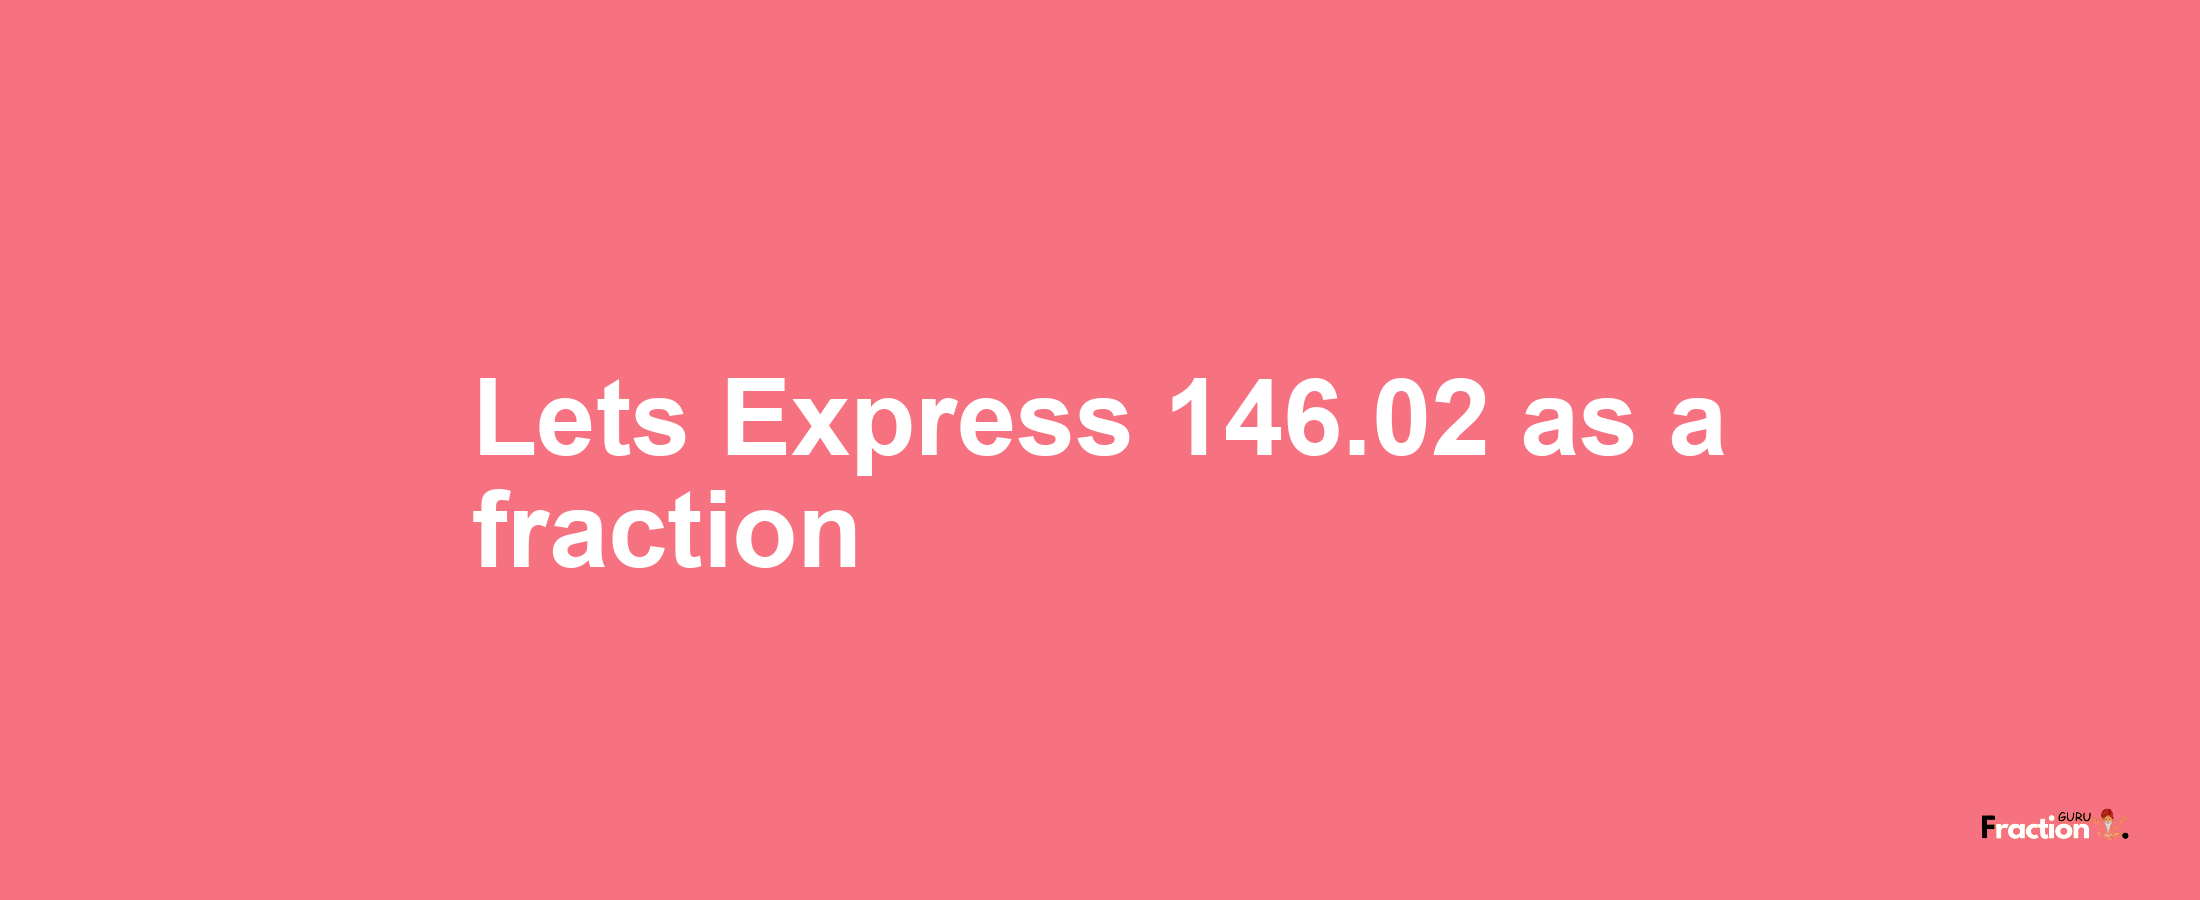 Lets Express 146.02 as afraction